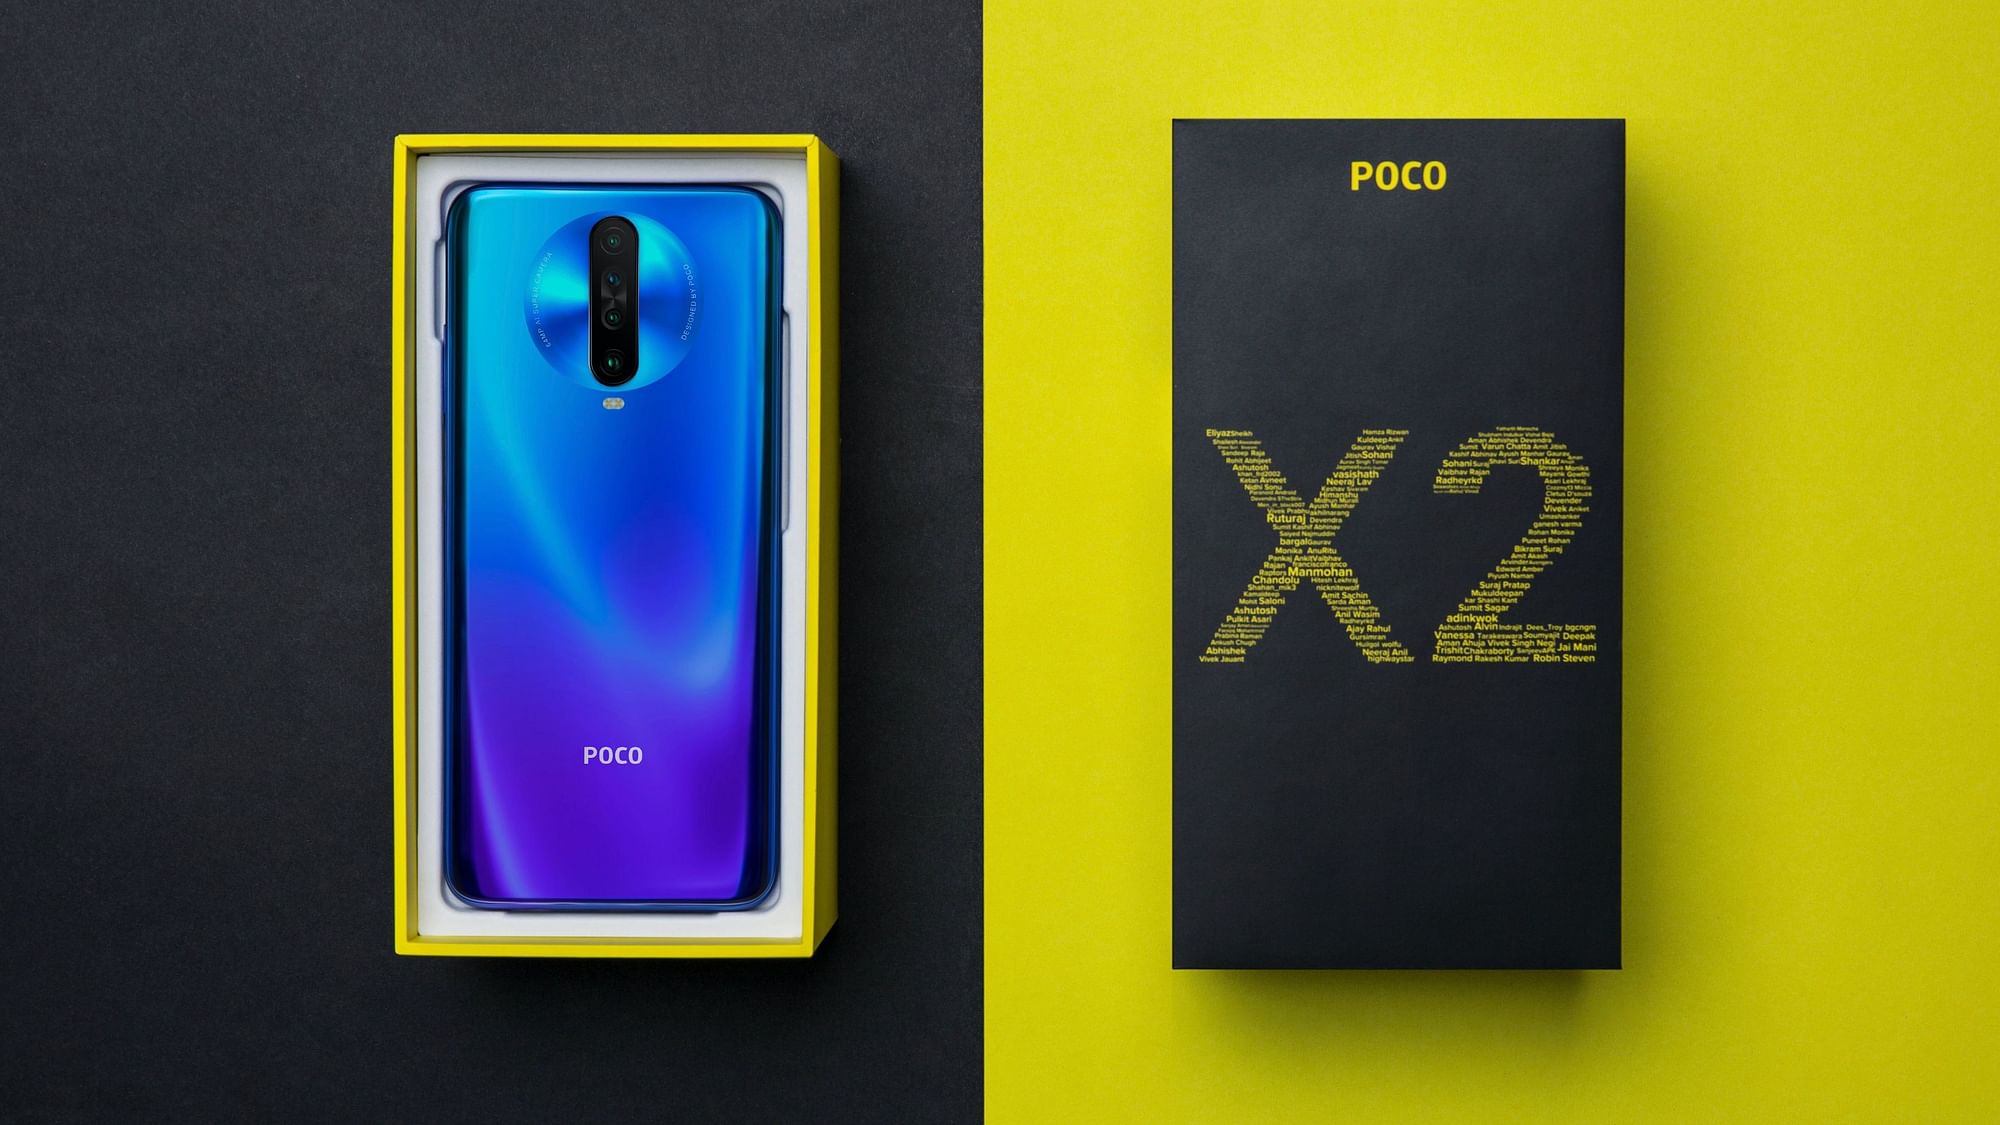 The Poco X2 comes with a 64-megapixel primary camera.